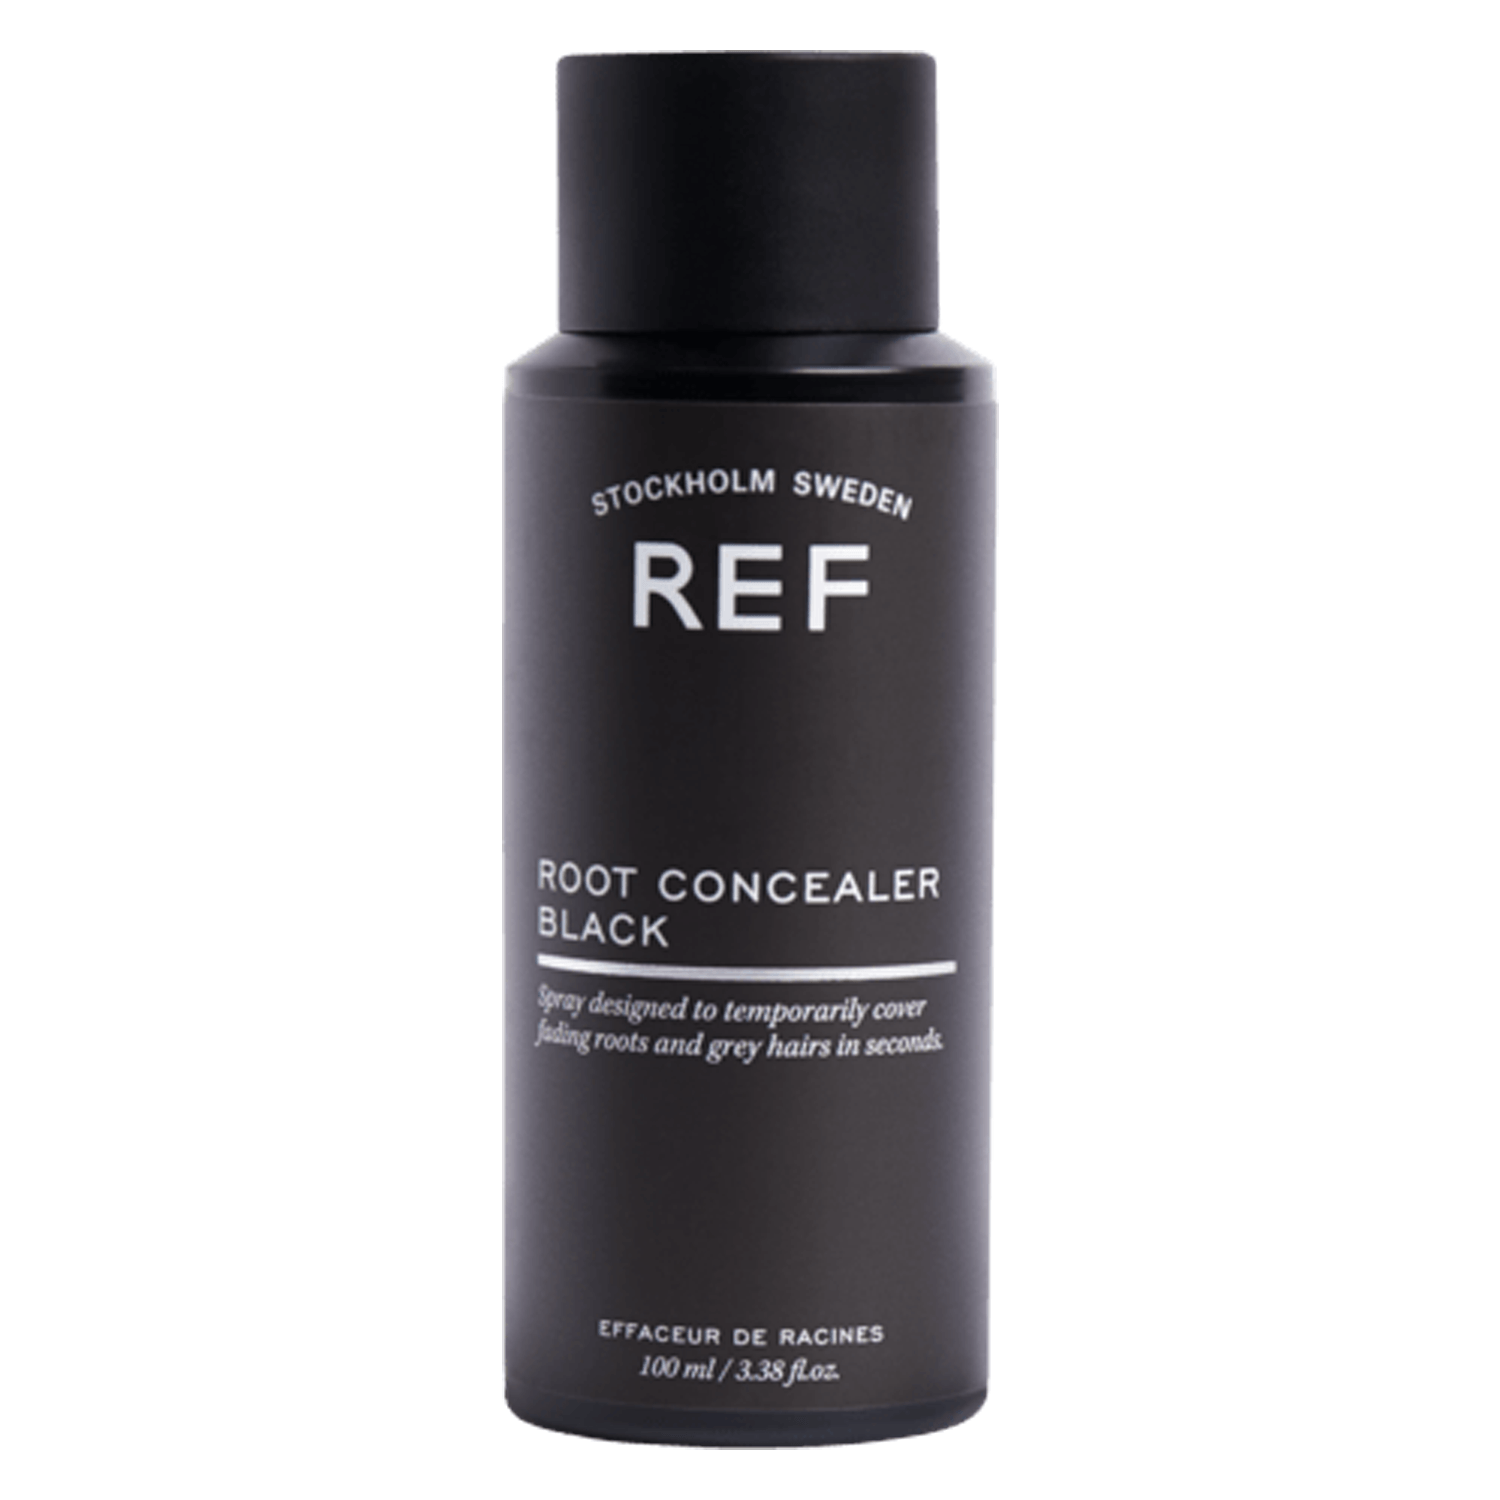 Product image from REF Styling - Root Concealer Black